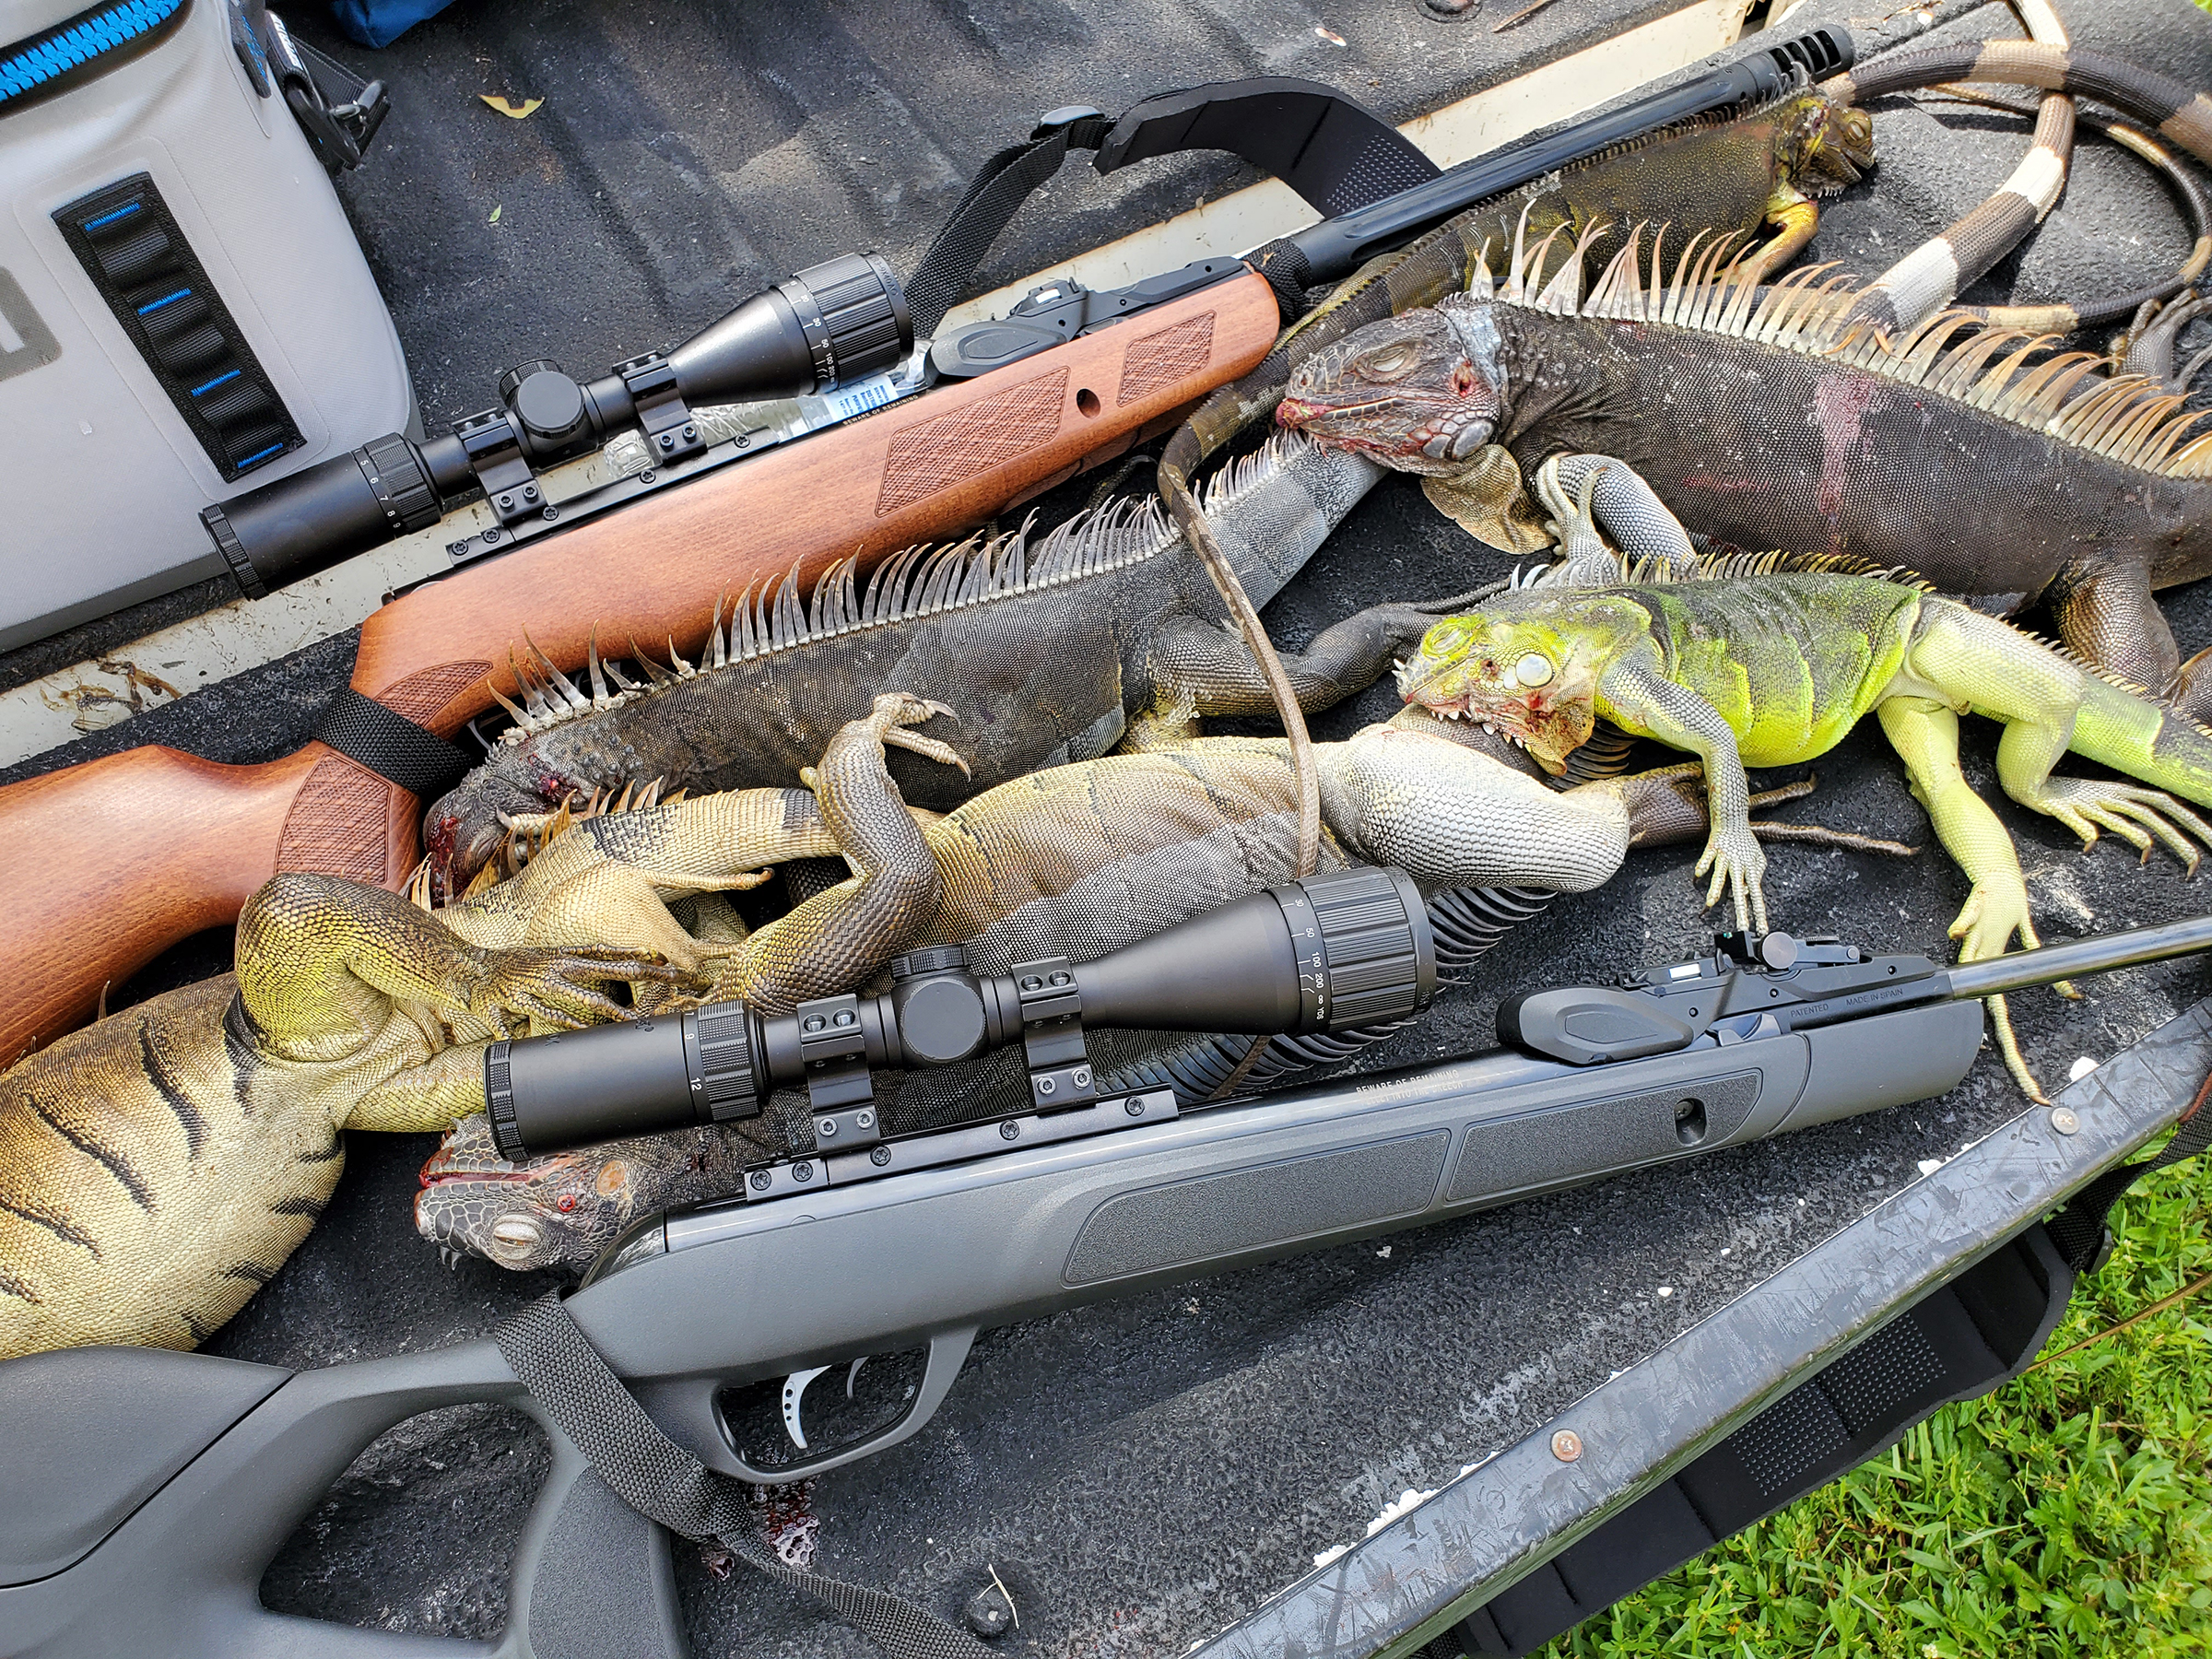 The Hunting Company - Iguana hunting in South Florida with blow dart guns!  We got lots of nice green iguanas, some very rare Mexican rock iguanas, and  a limit of peacock bass!